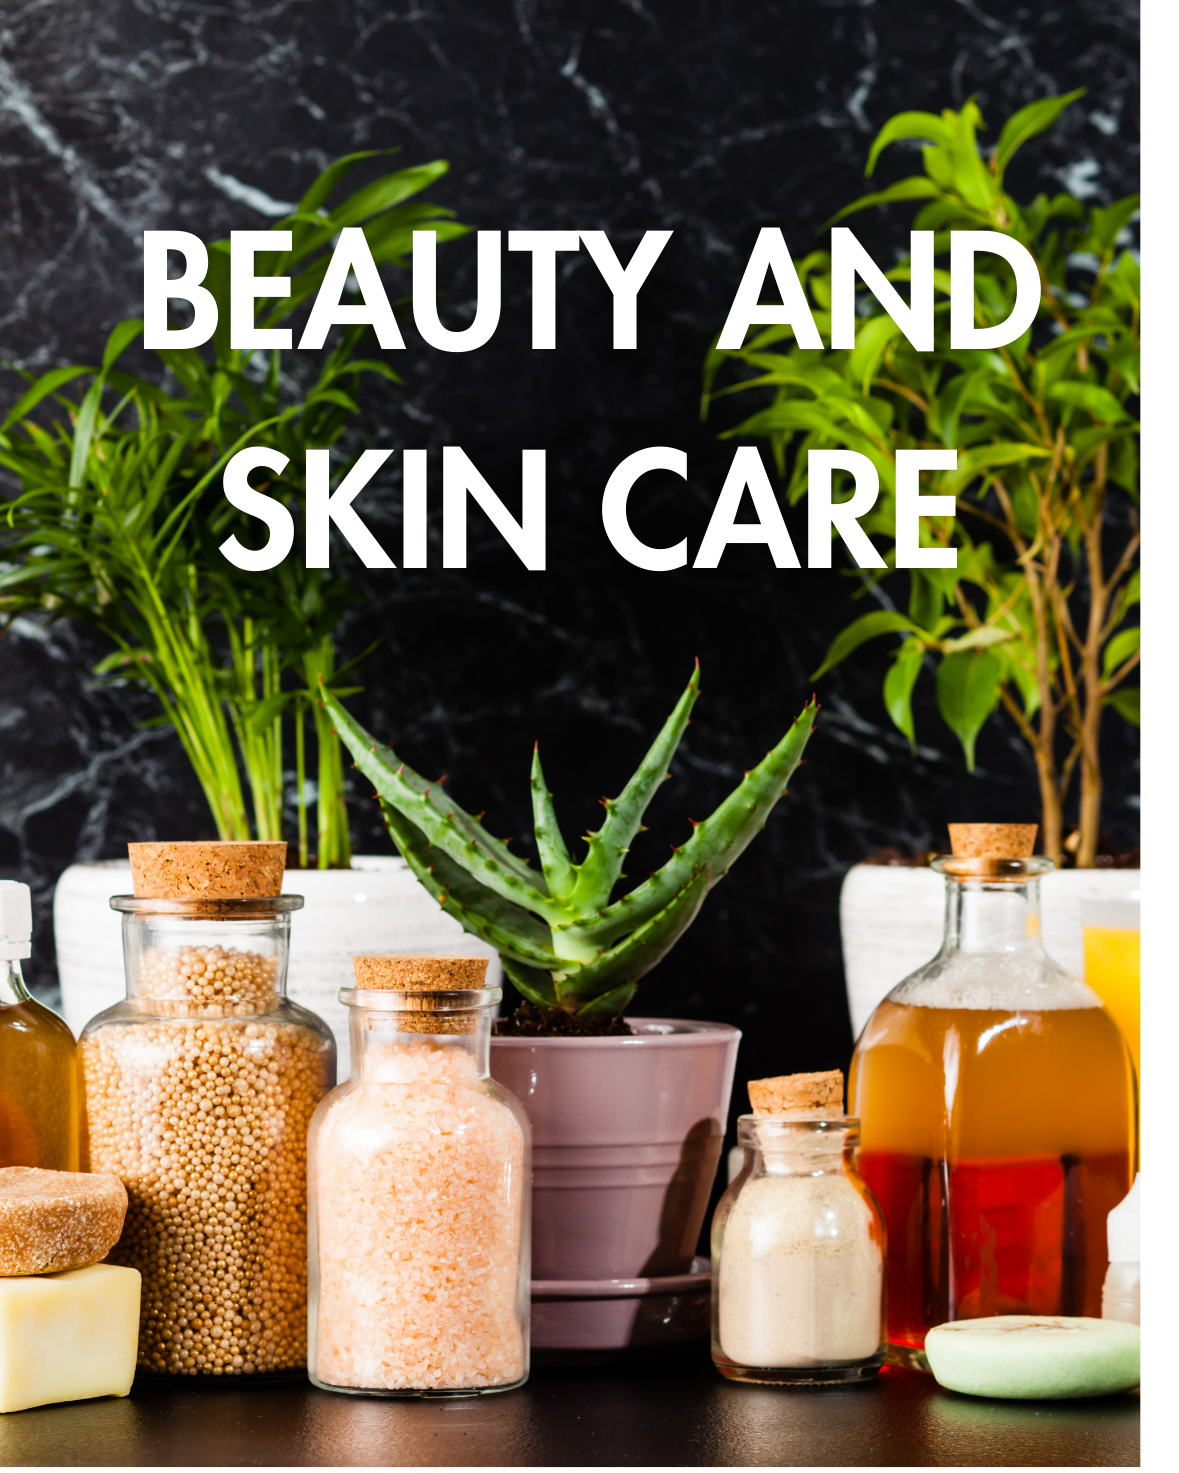 BEAUTY AND SKIN CARE